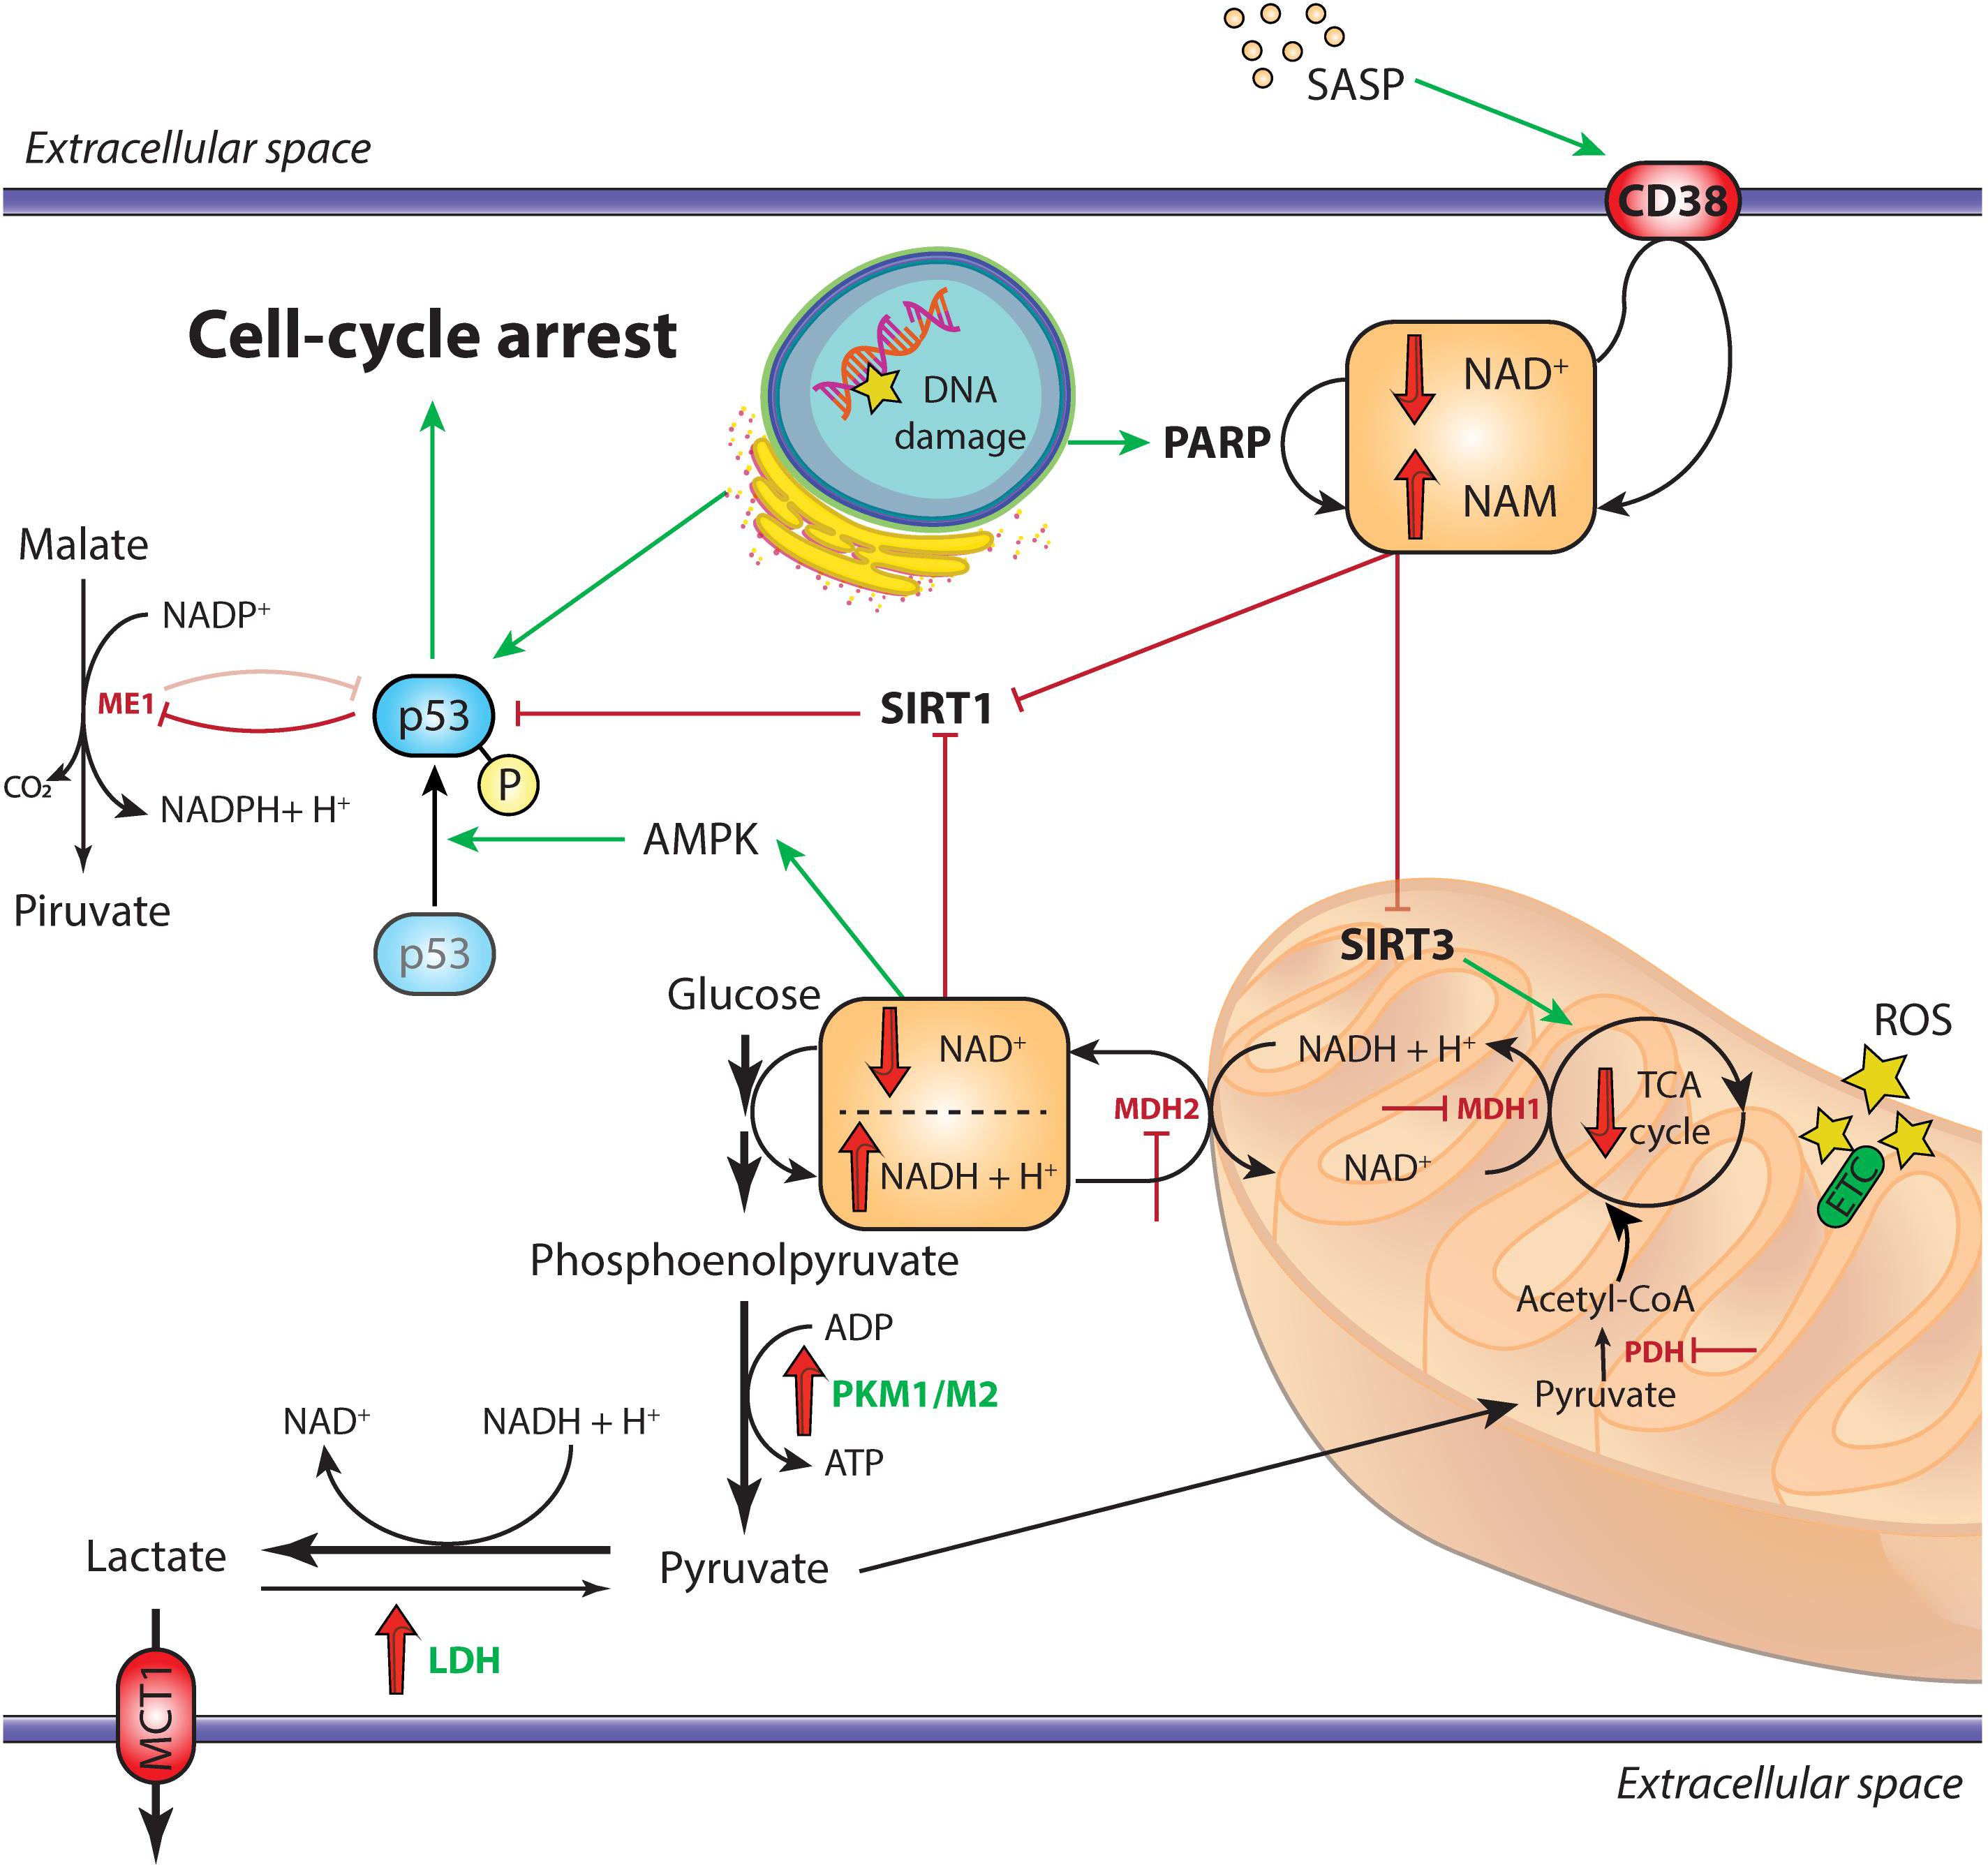 Frontiers | Where Metabolism Meets Senescence: Focus on Endothelial Cells